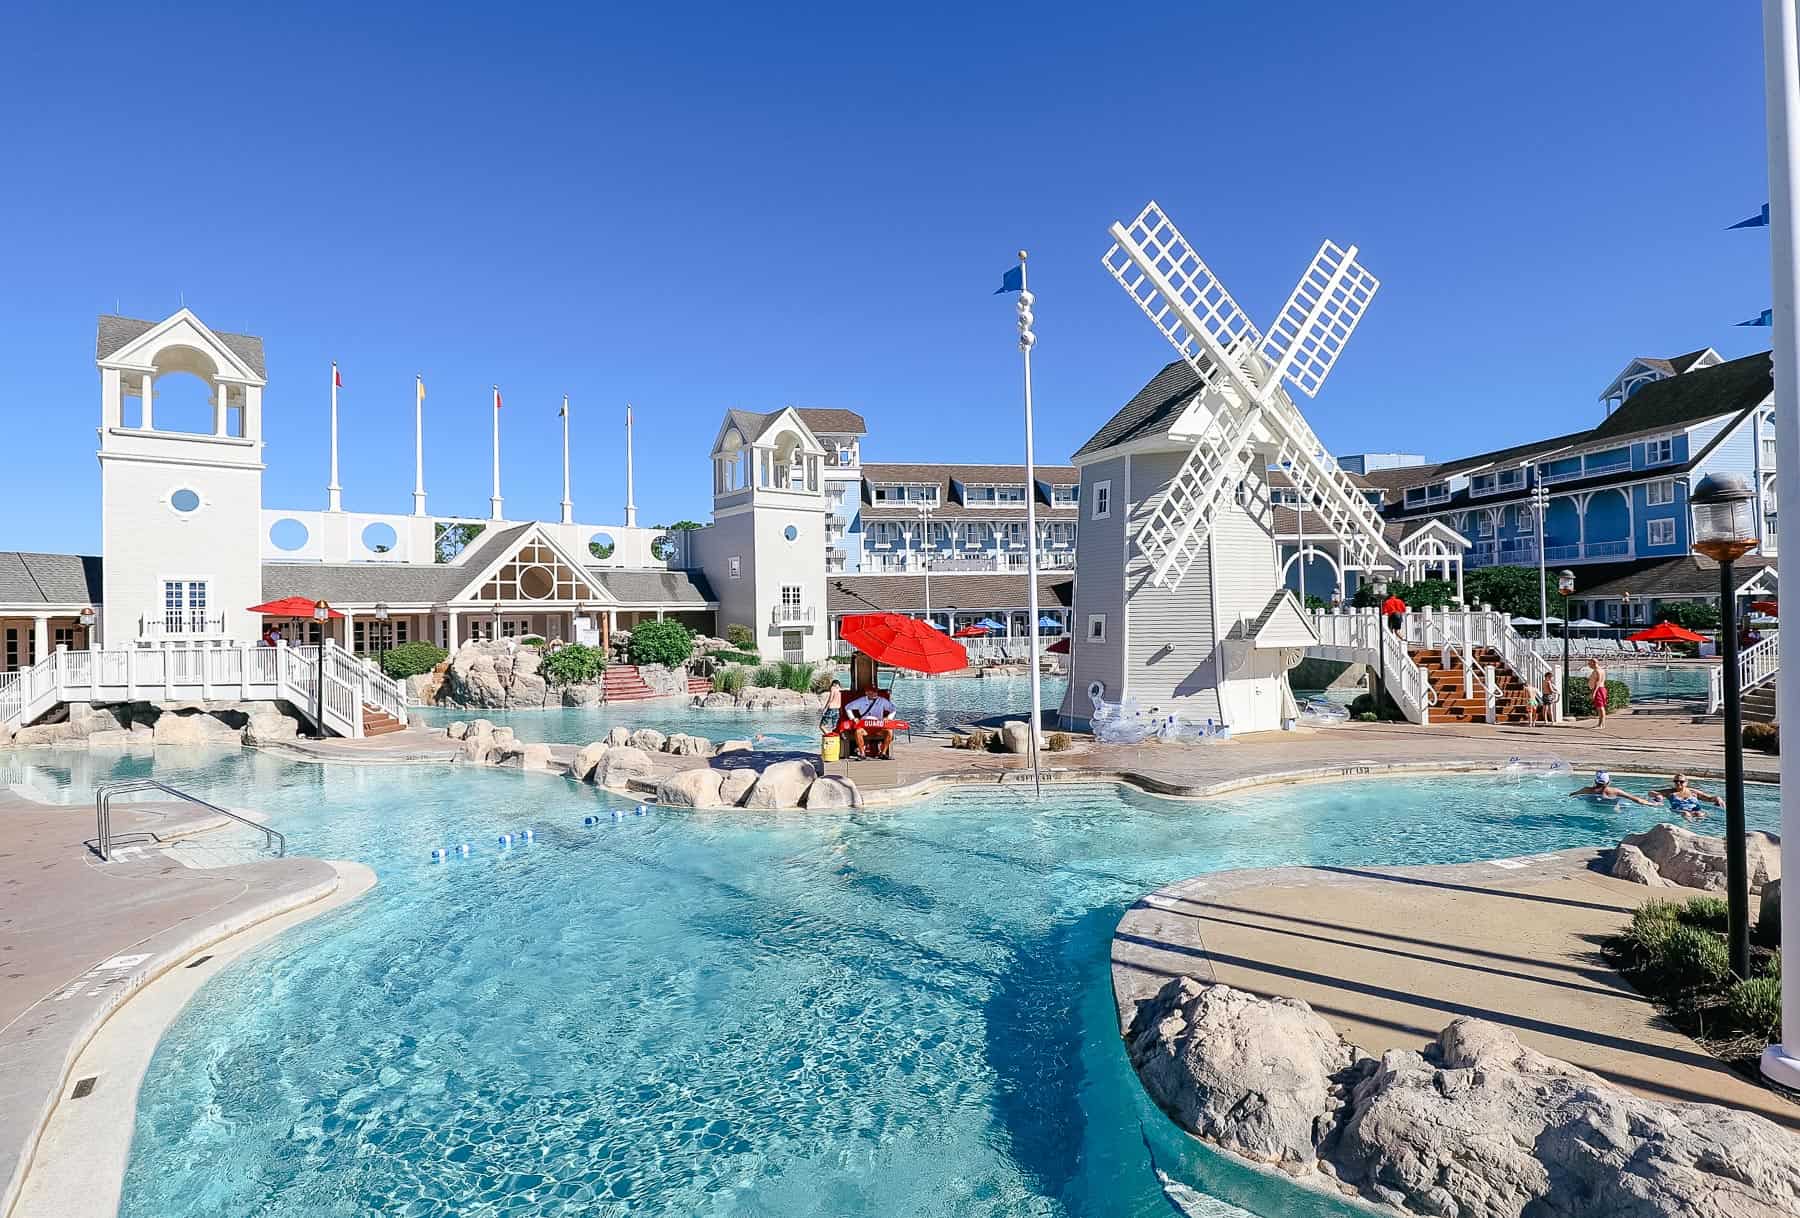 The 10 Best Pools at Disney World (Ranked + Honorable Mentions)